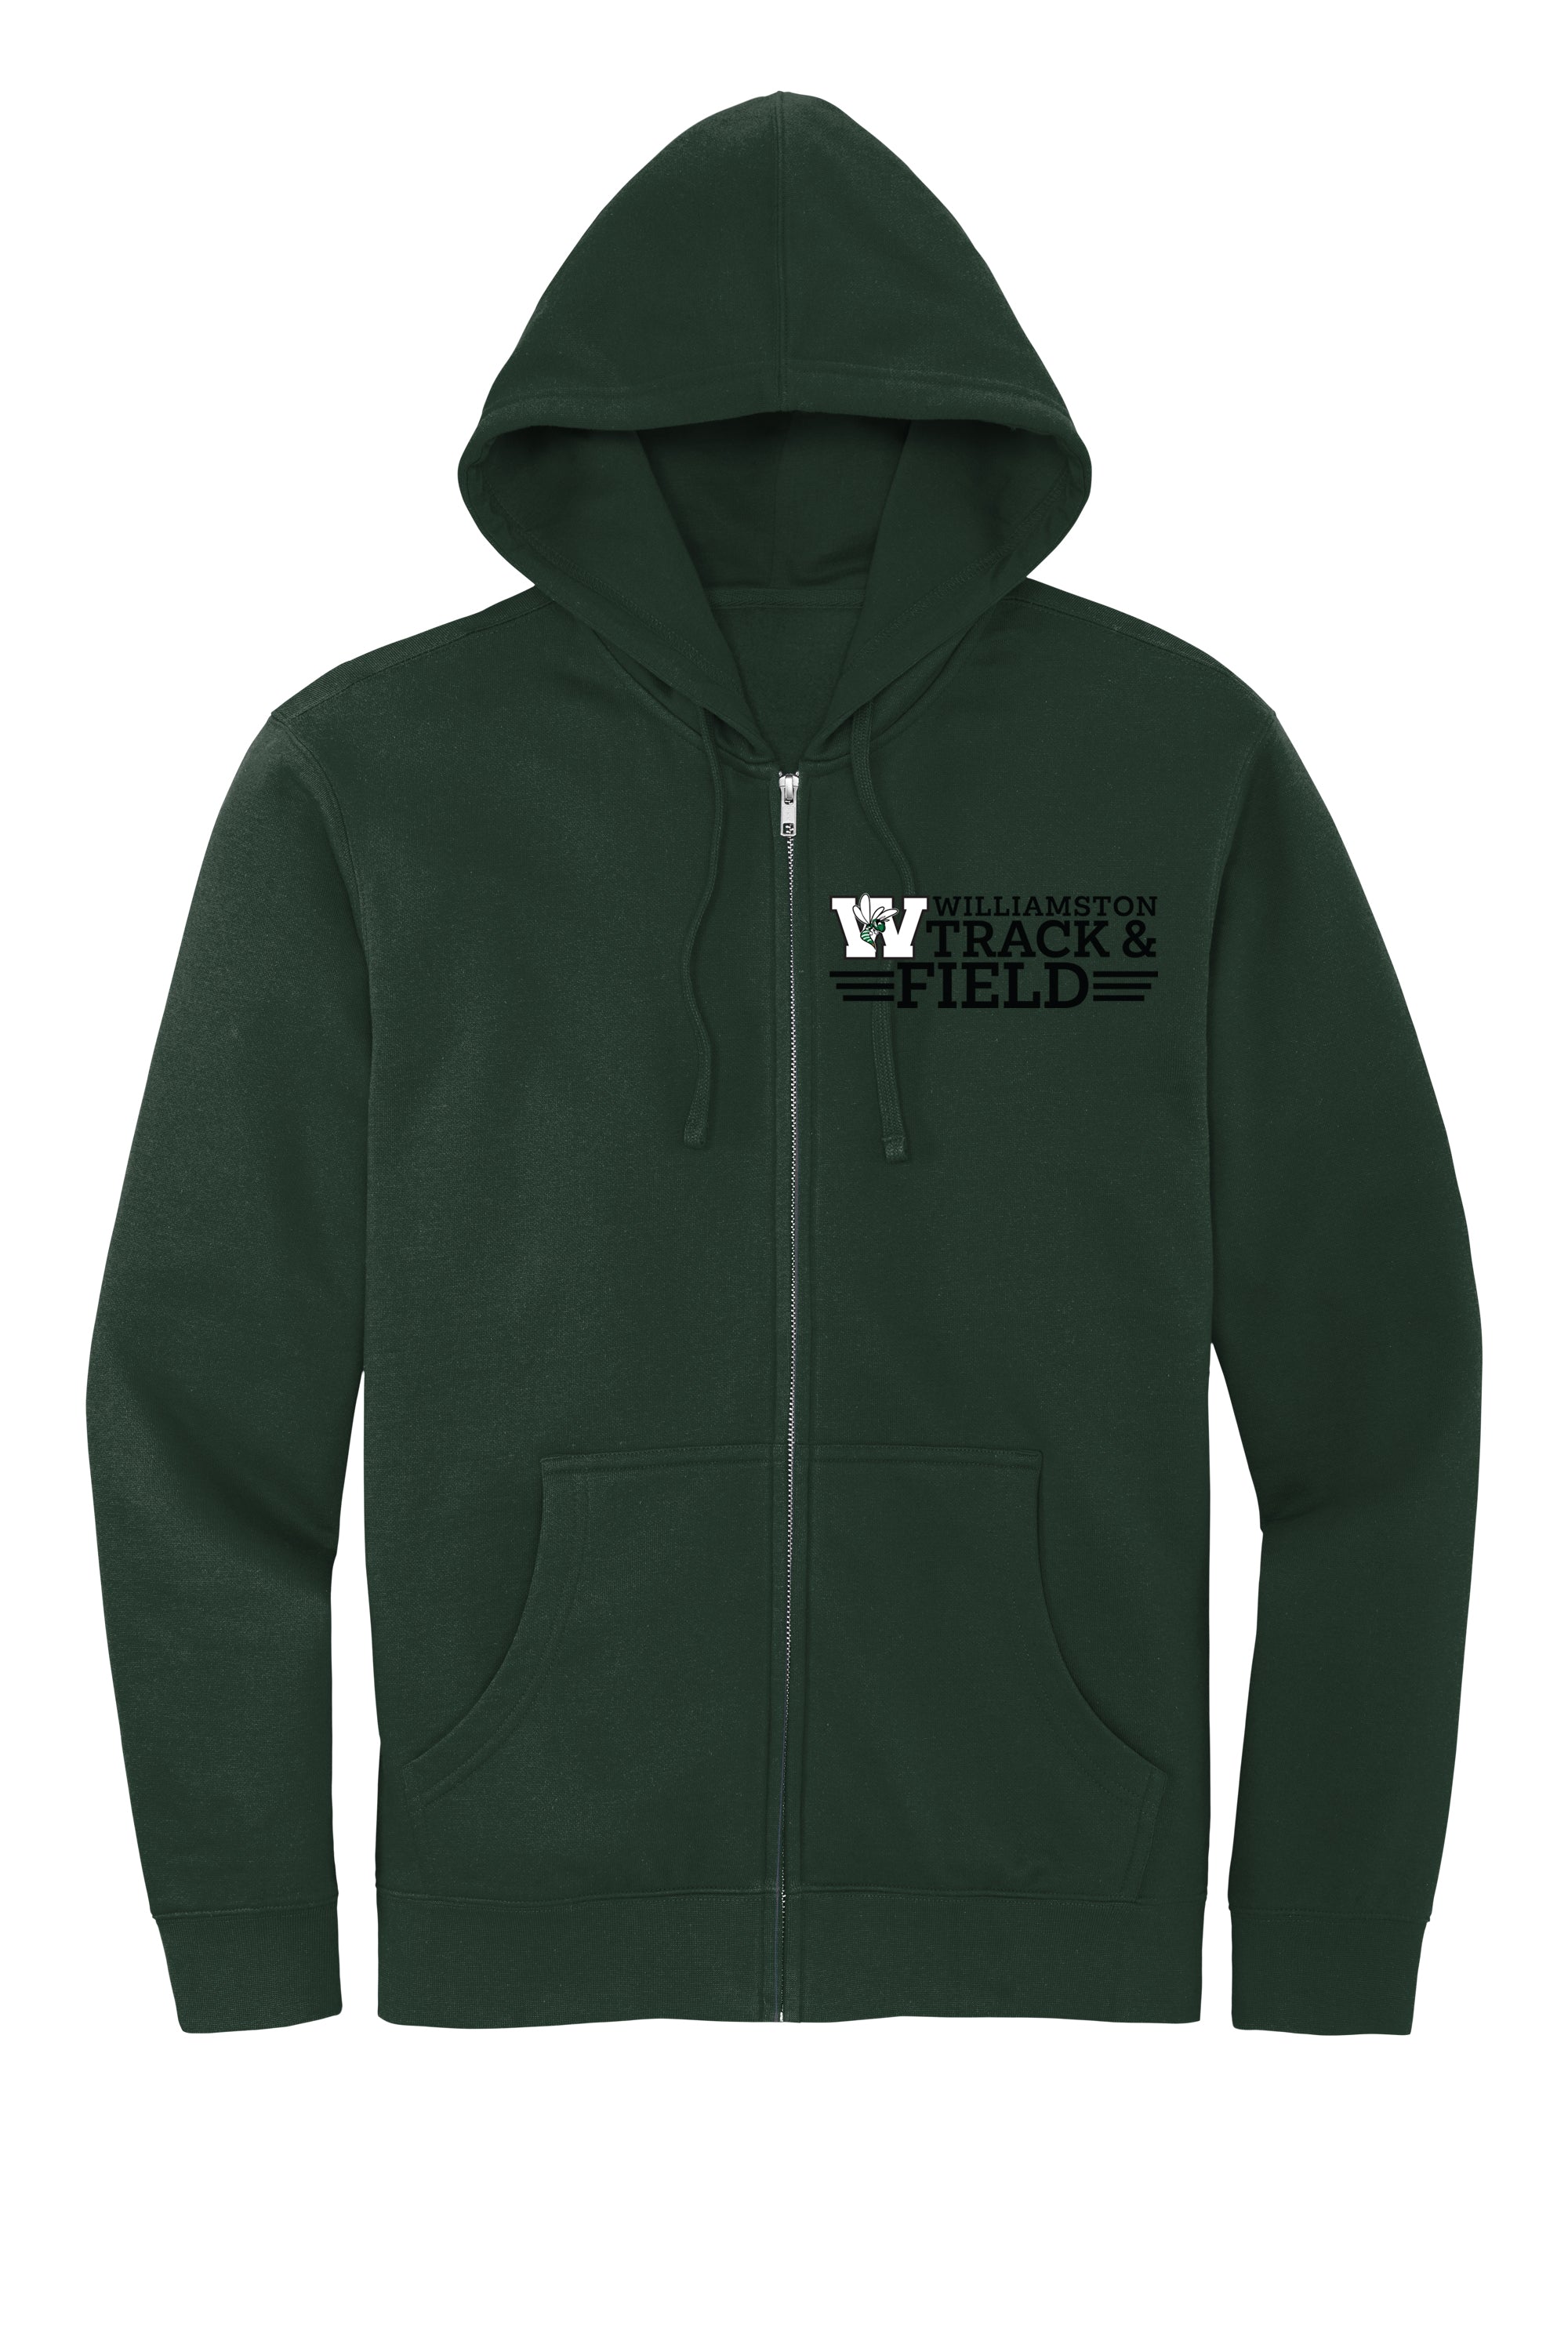 Williamston Track and Field - Zip Up Hoodie